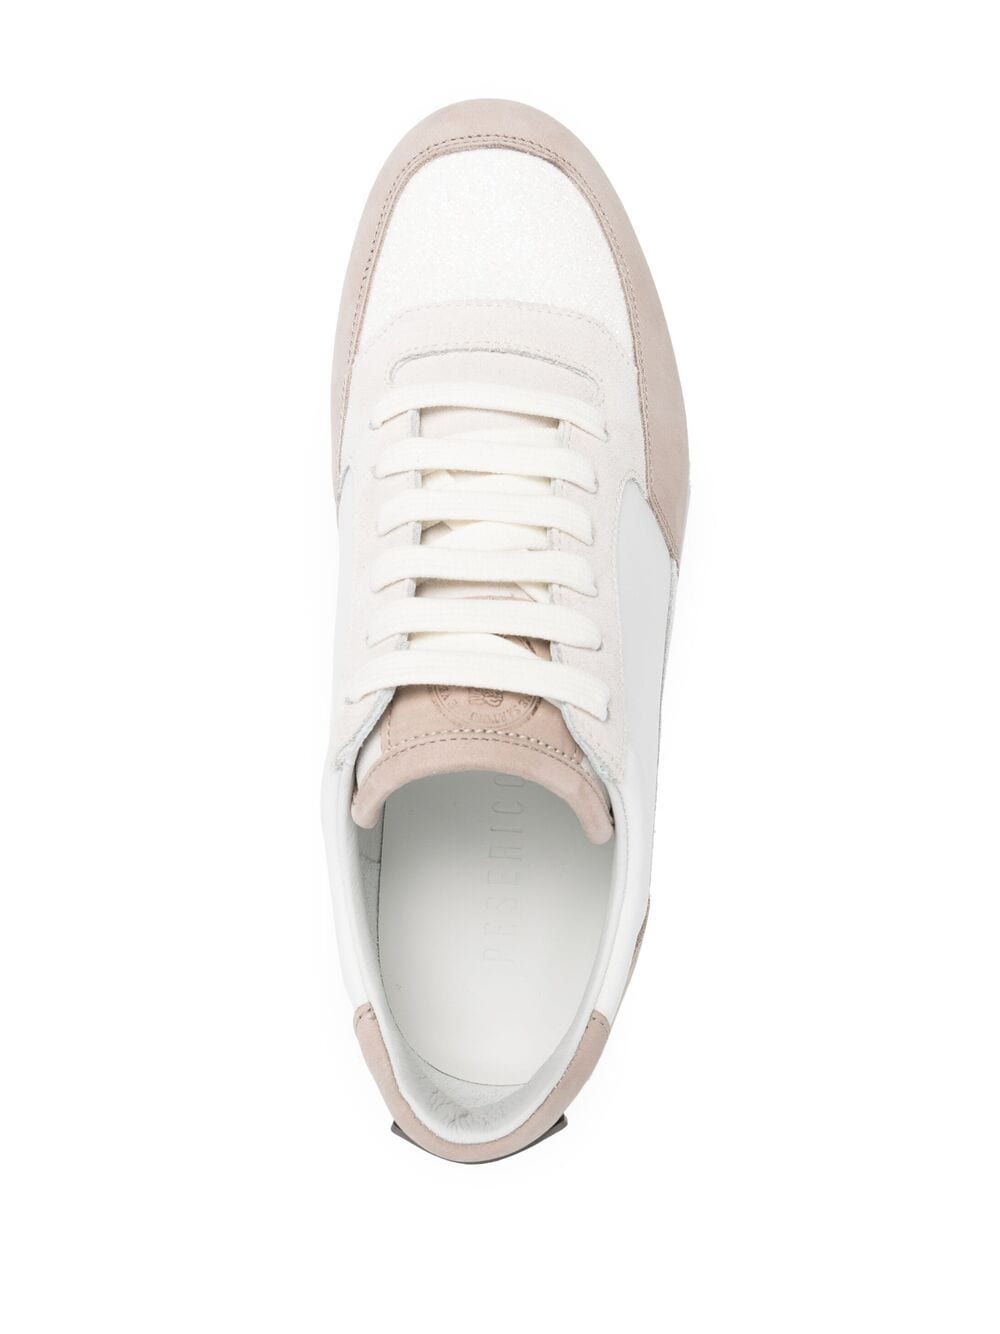 Shop Peserico glitter toe lace-up sneakers with Express Delivery - FARFETCH